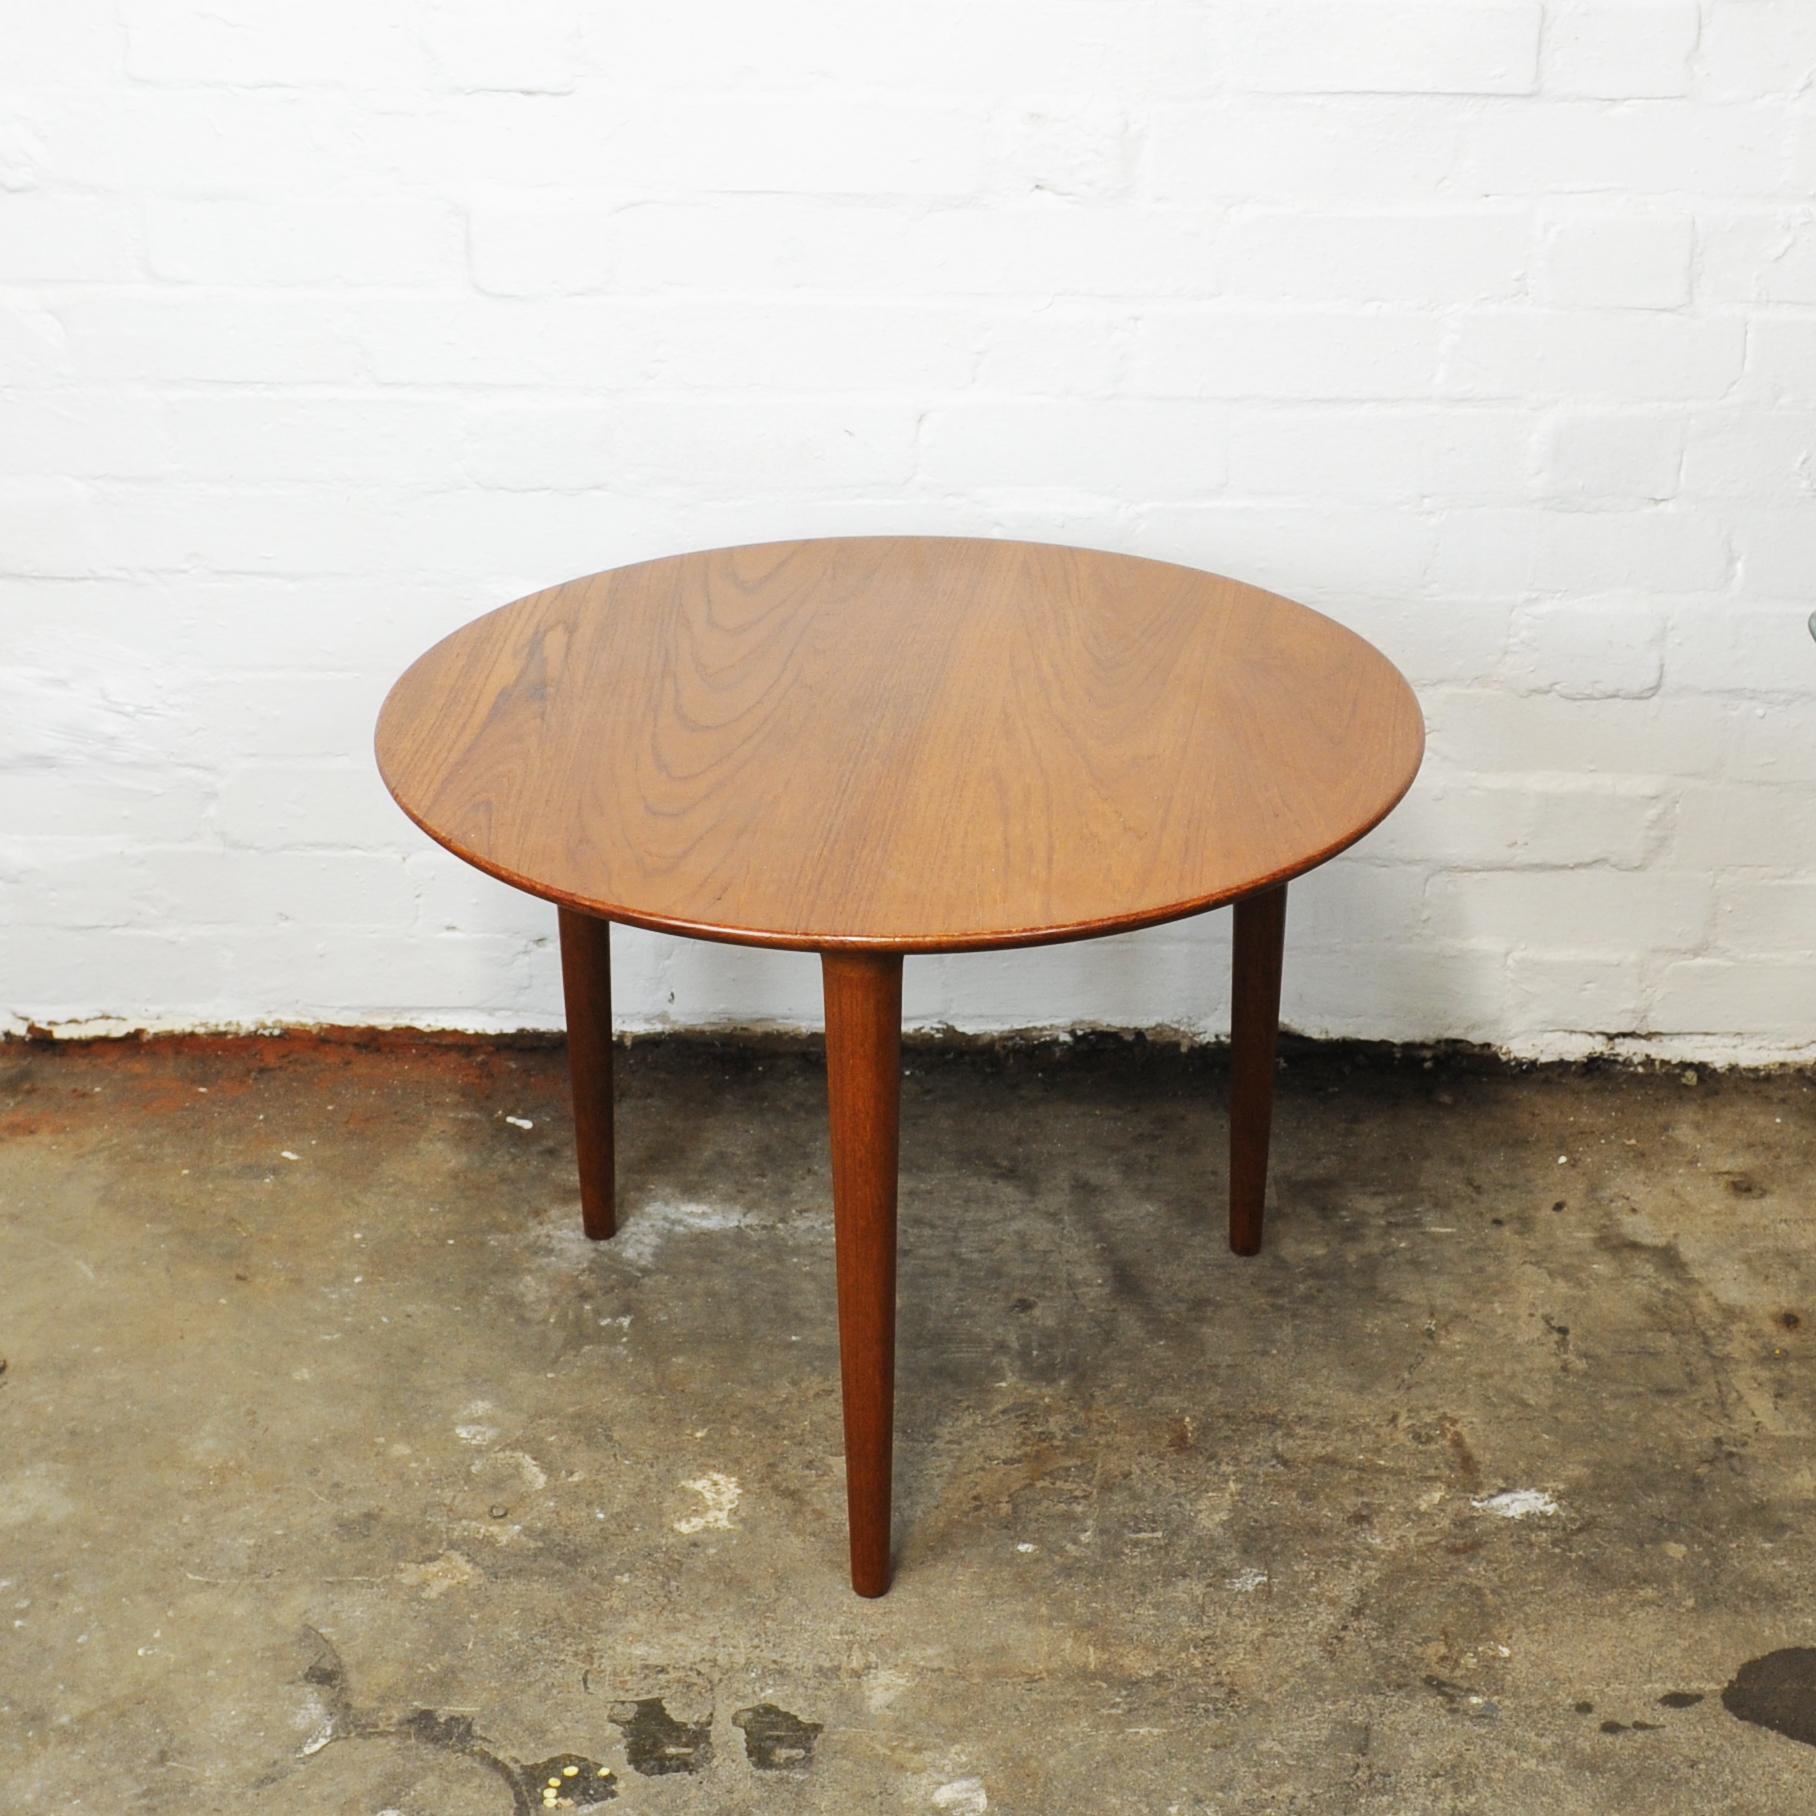 Mid-20th Century Round Teak Three Legged Coffee Table by Norsk Design Ltd, 1960s For Sale